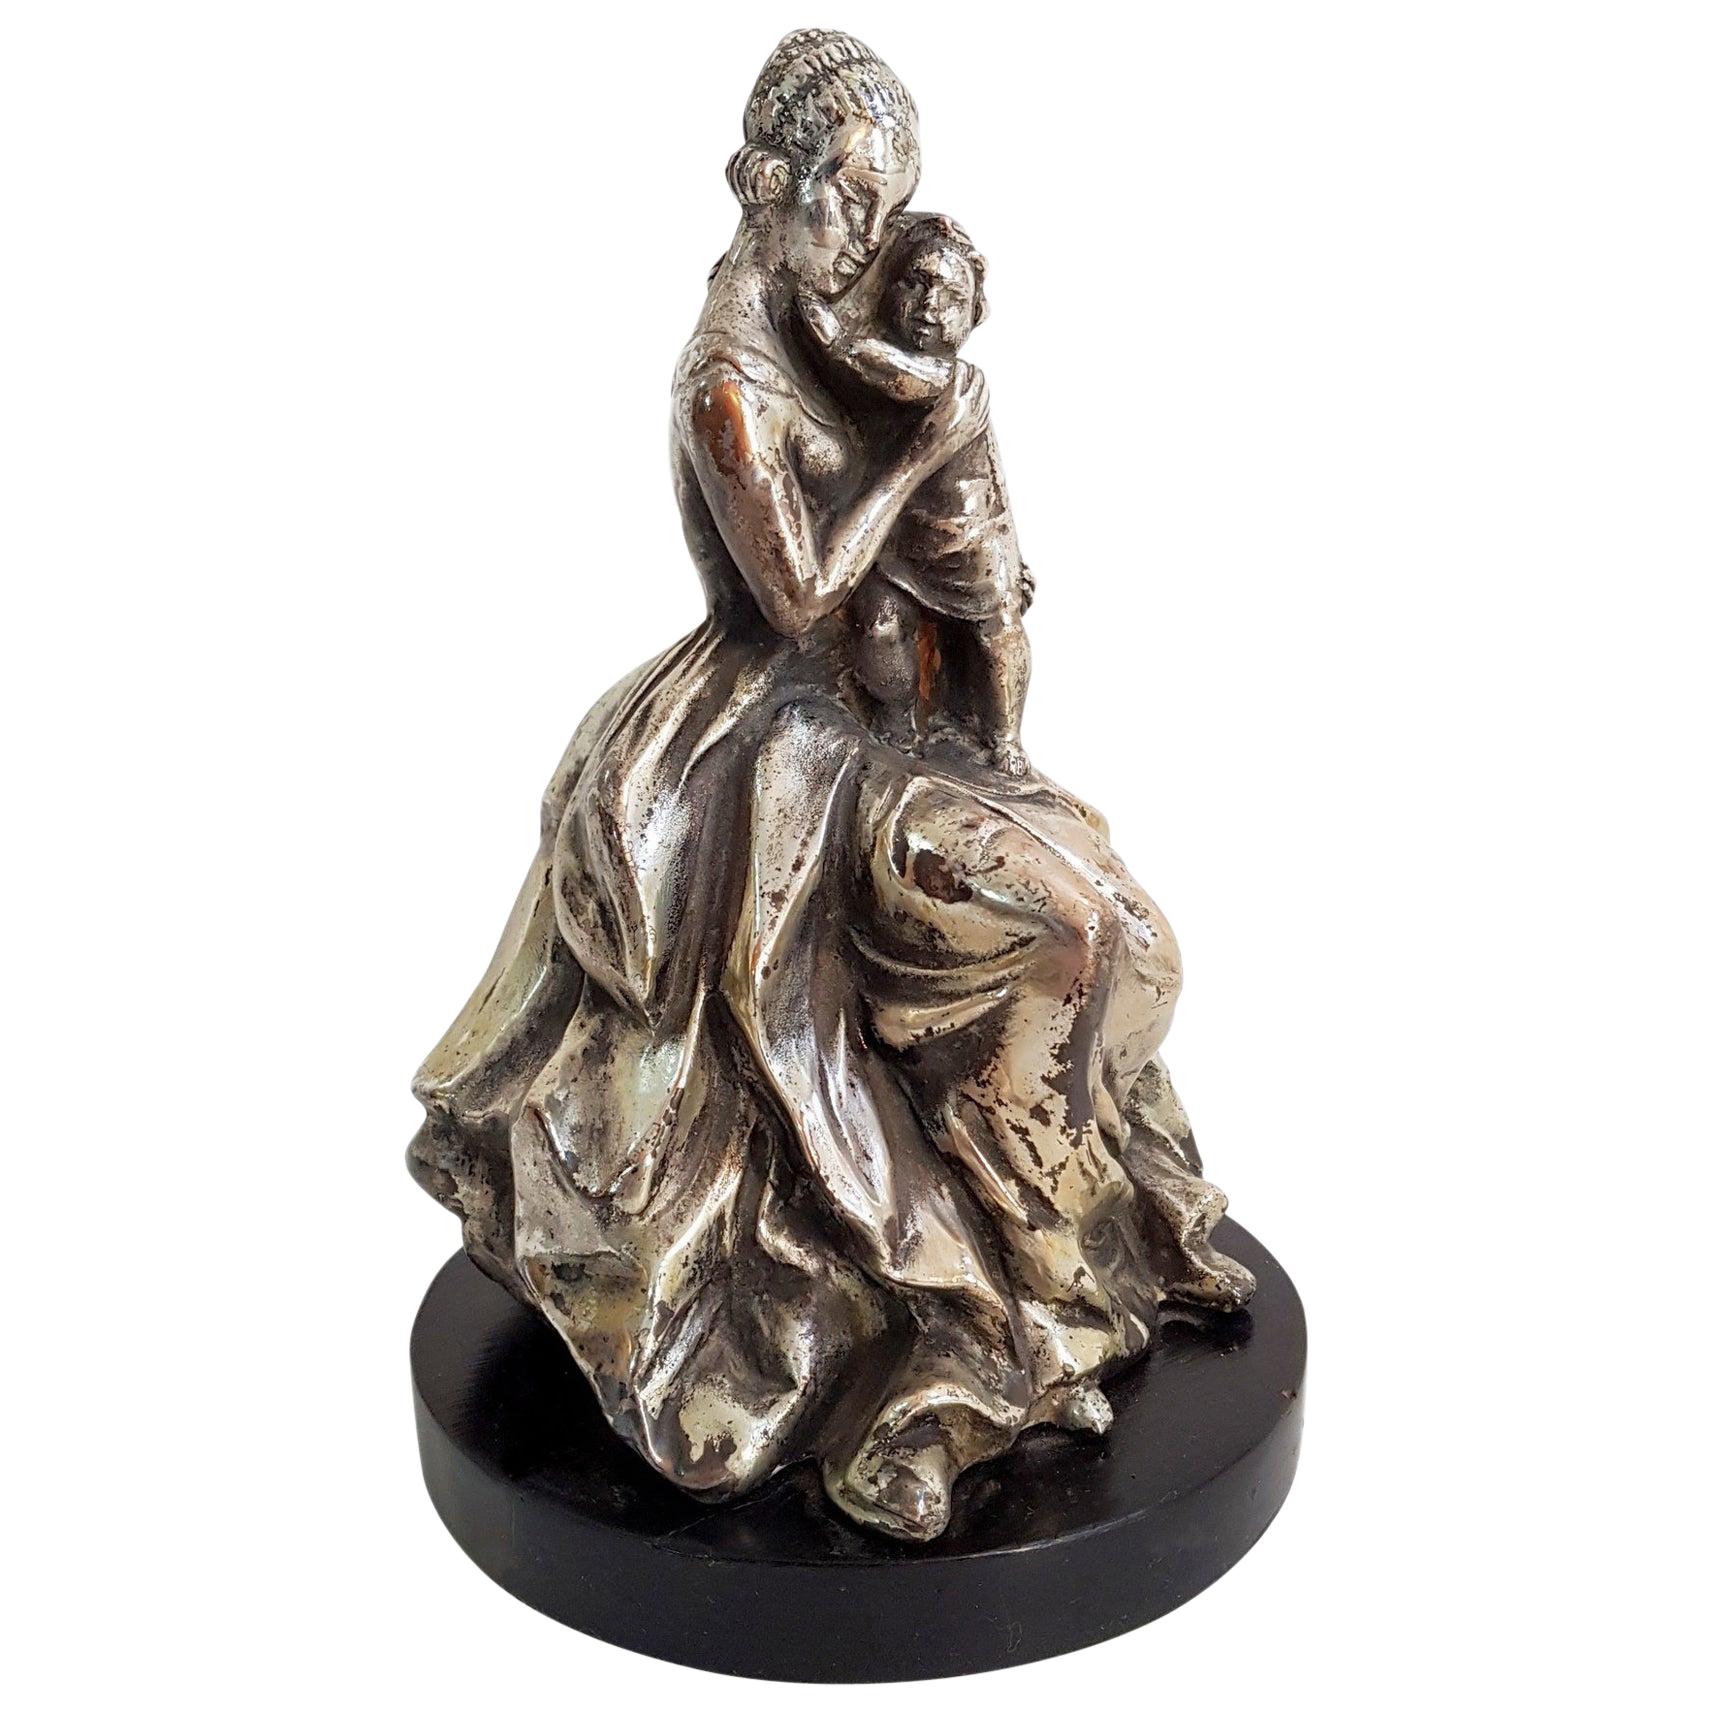 Figurine "Mother with Child" by Cacciapuoti, Italy